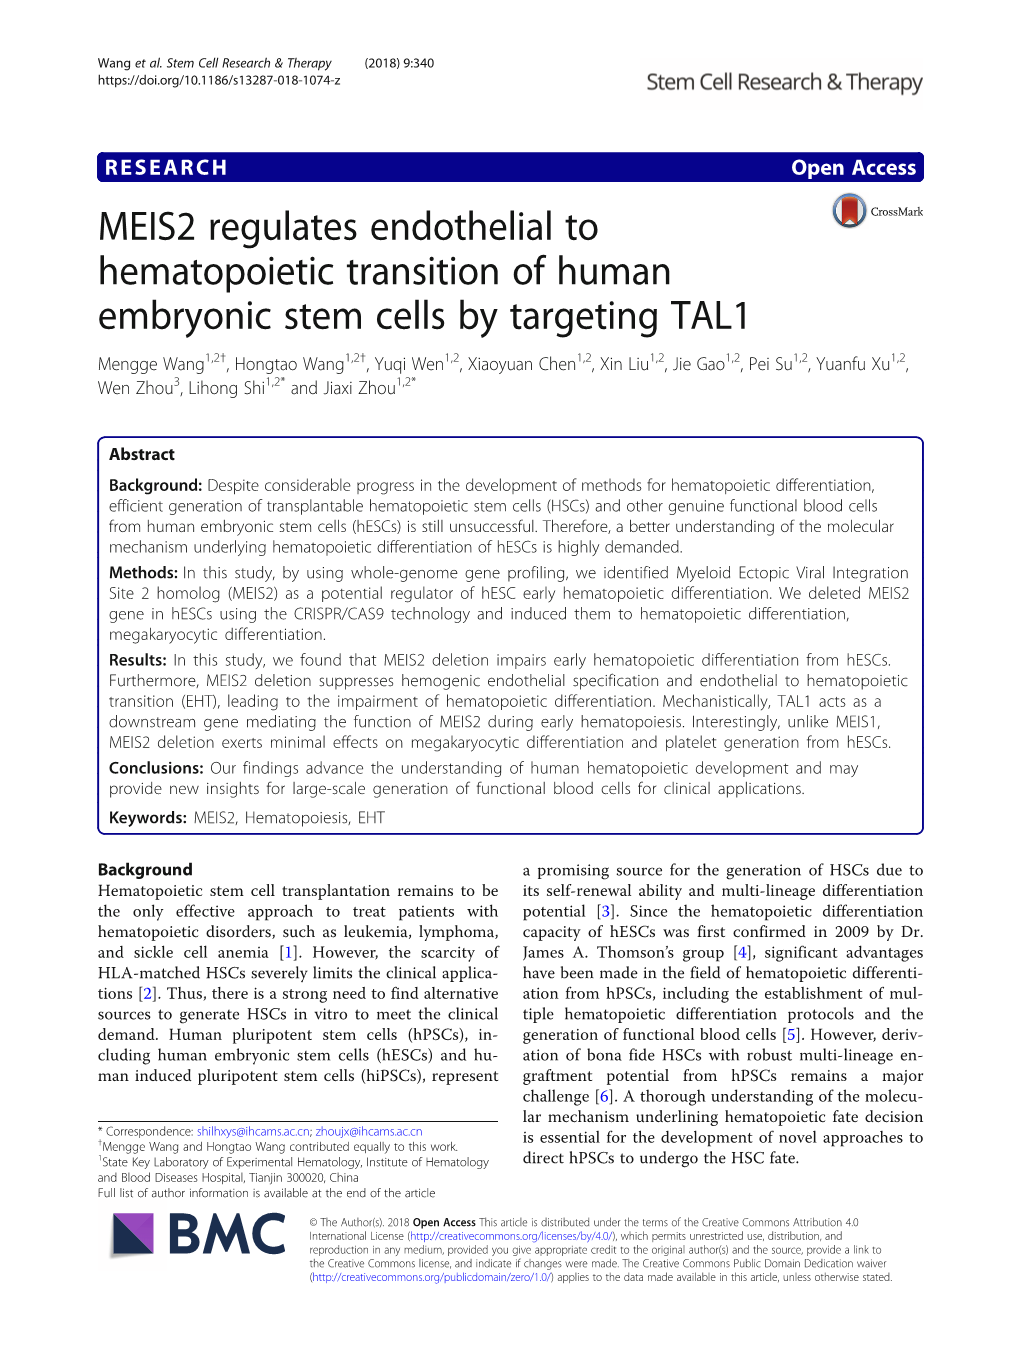 MEIS2 Regulates Endothelial to Hematopoietic Transition of Human